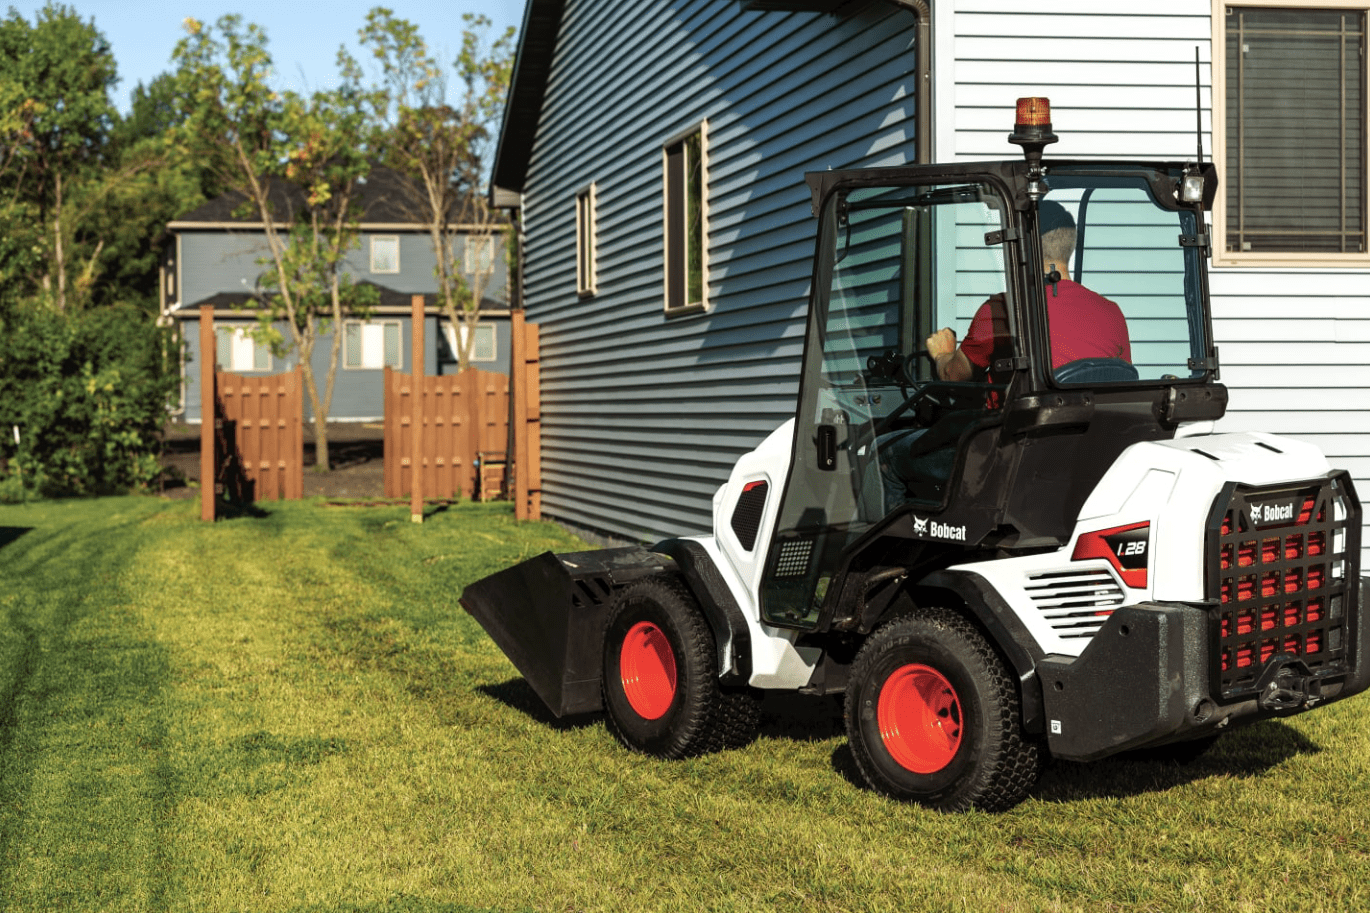 Browse Specs and more for the L28 Small Articulated Loader - Bobcat of North Texas